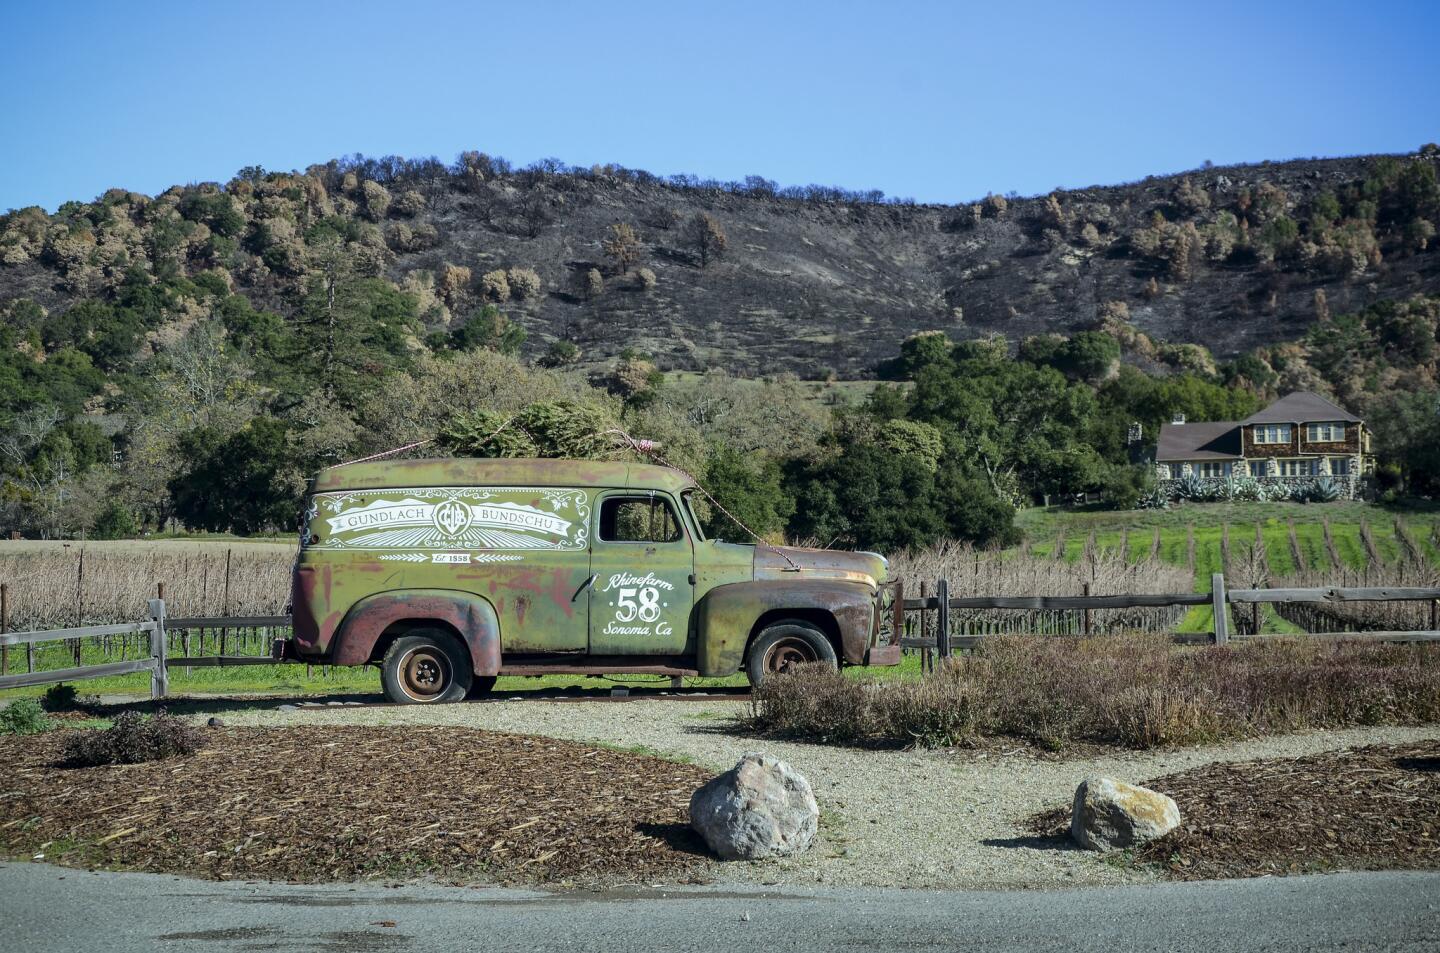 Outside the city of Sonoma